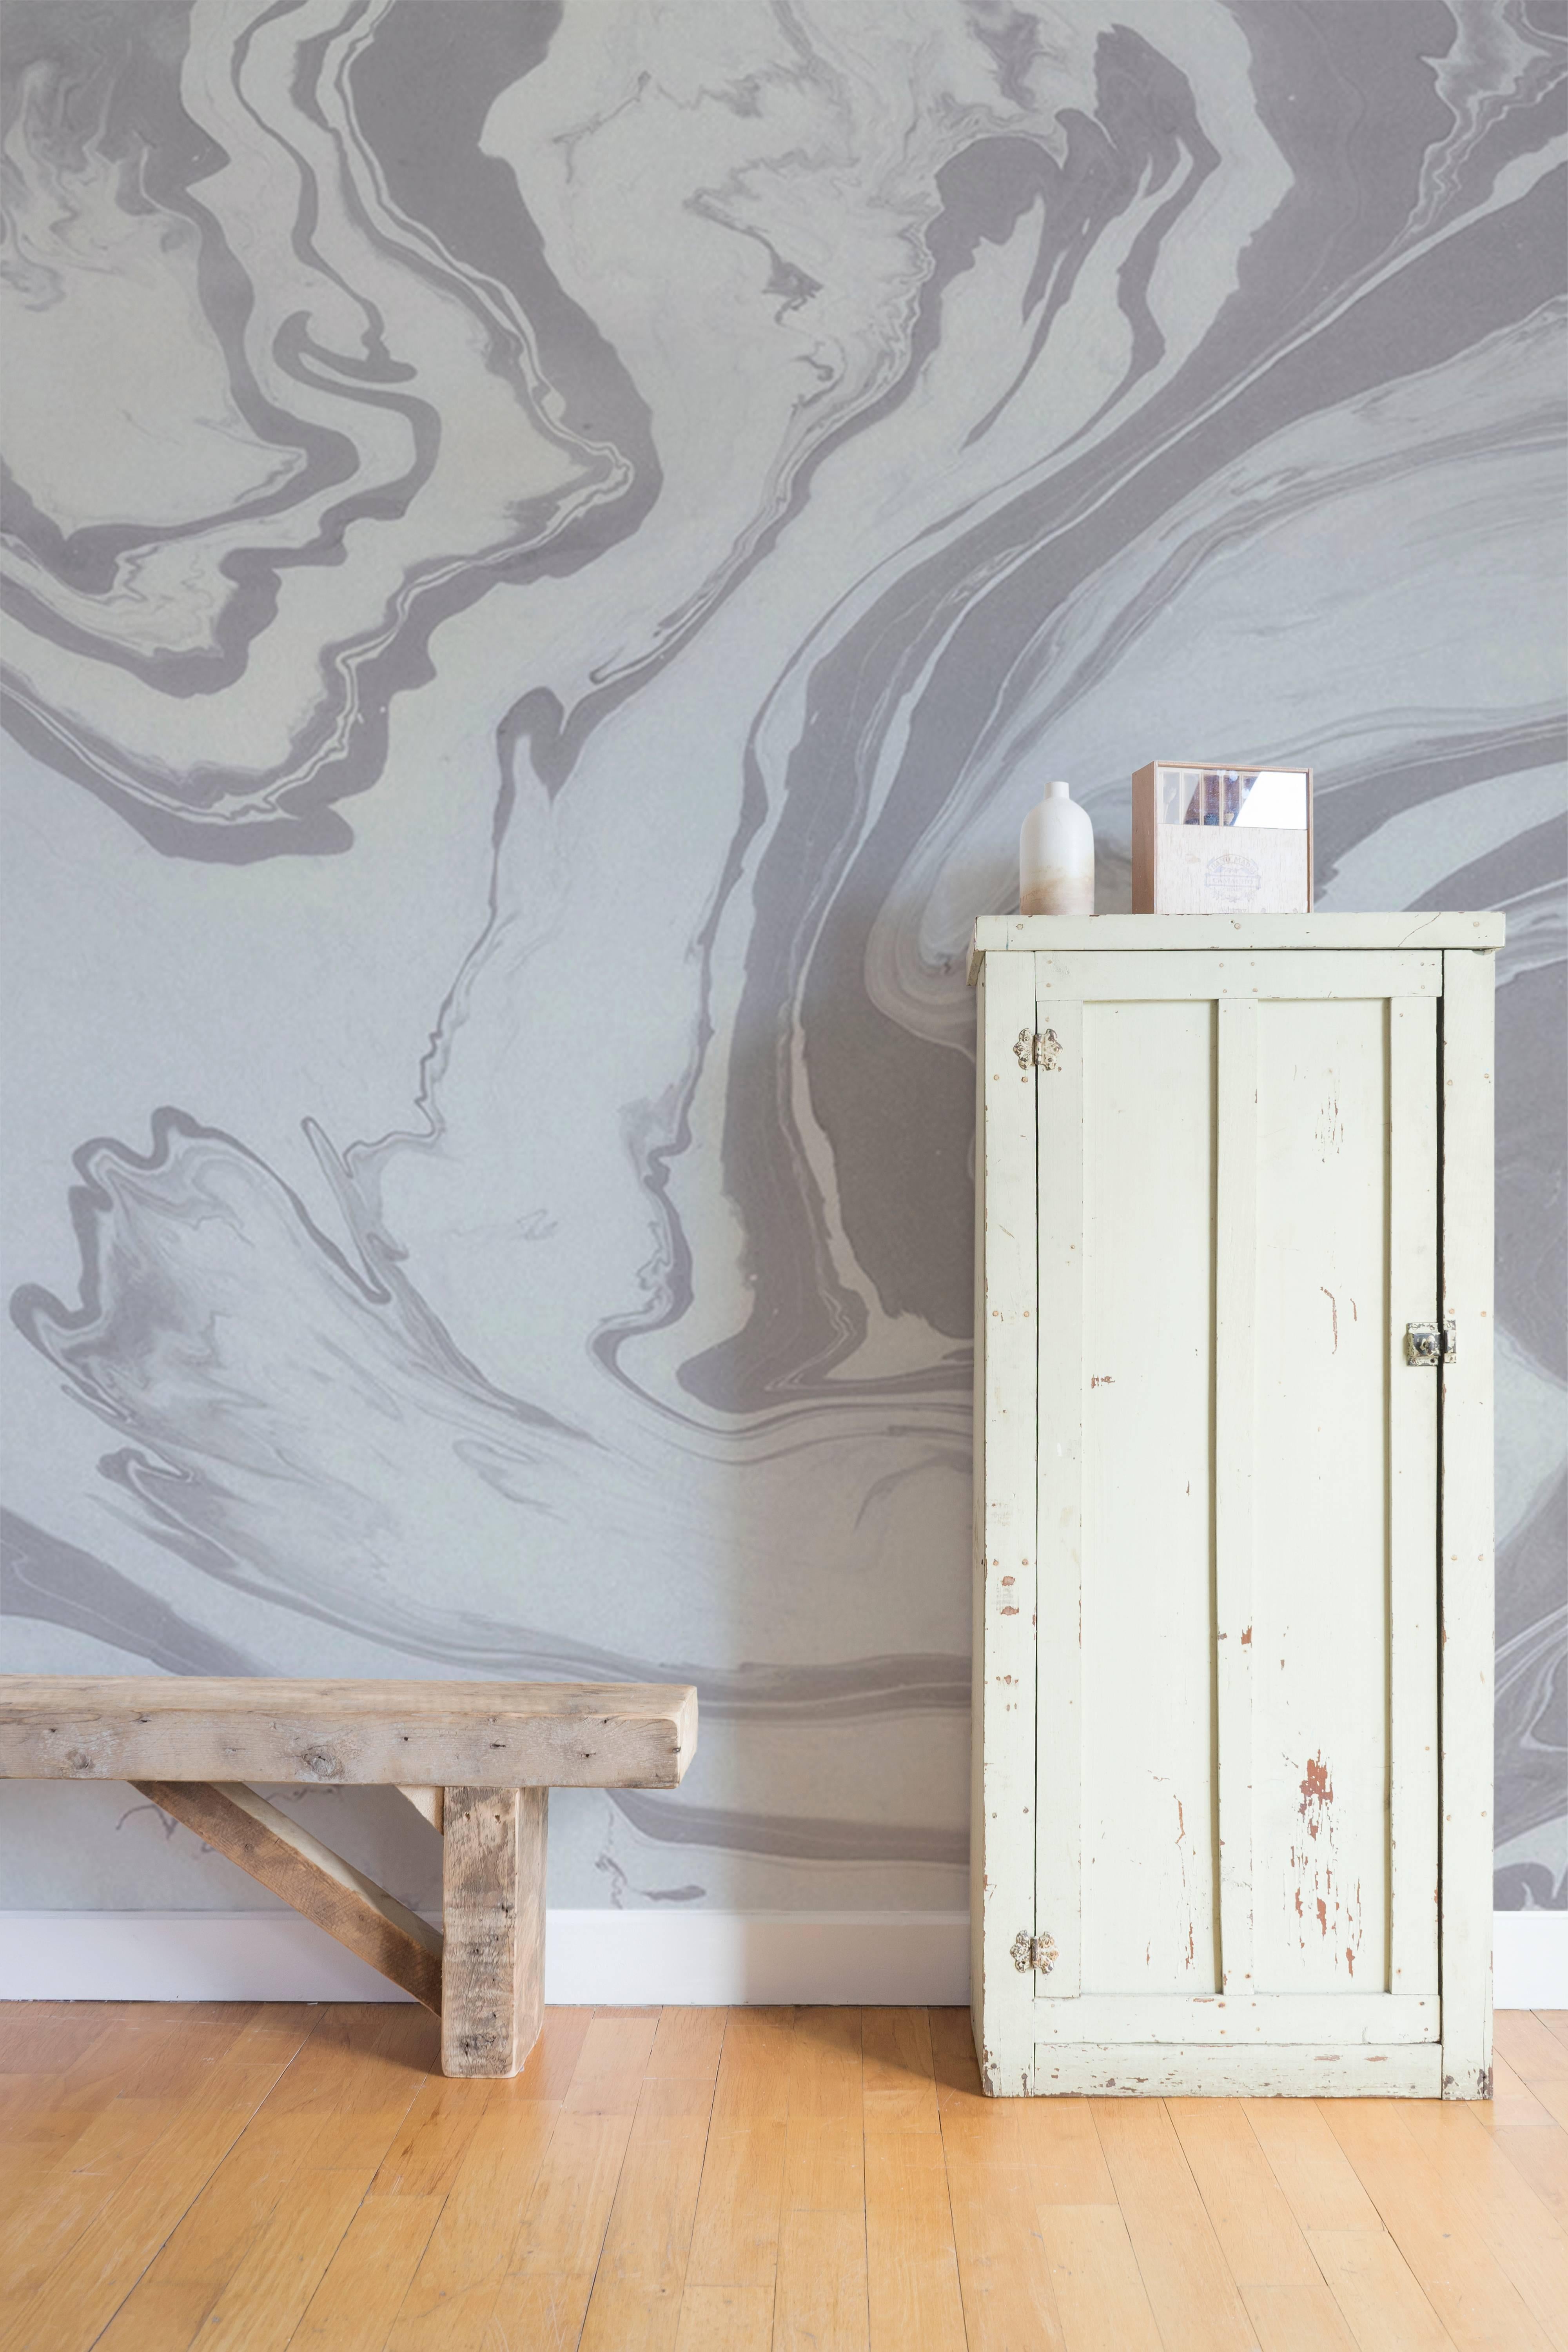 All of our wallpapers are priced by the square foot and are non-repeating custom murals. As a result, each order is laid out and printed to fit the exact dimensions of your wall. The Sumi Collection is printed on a commercial grade PVC & POA-free